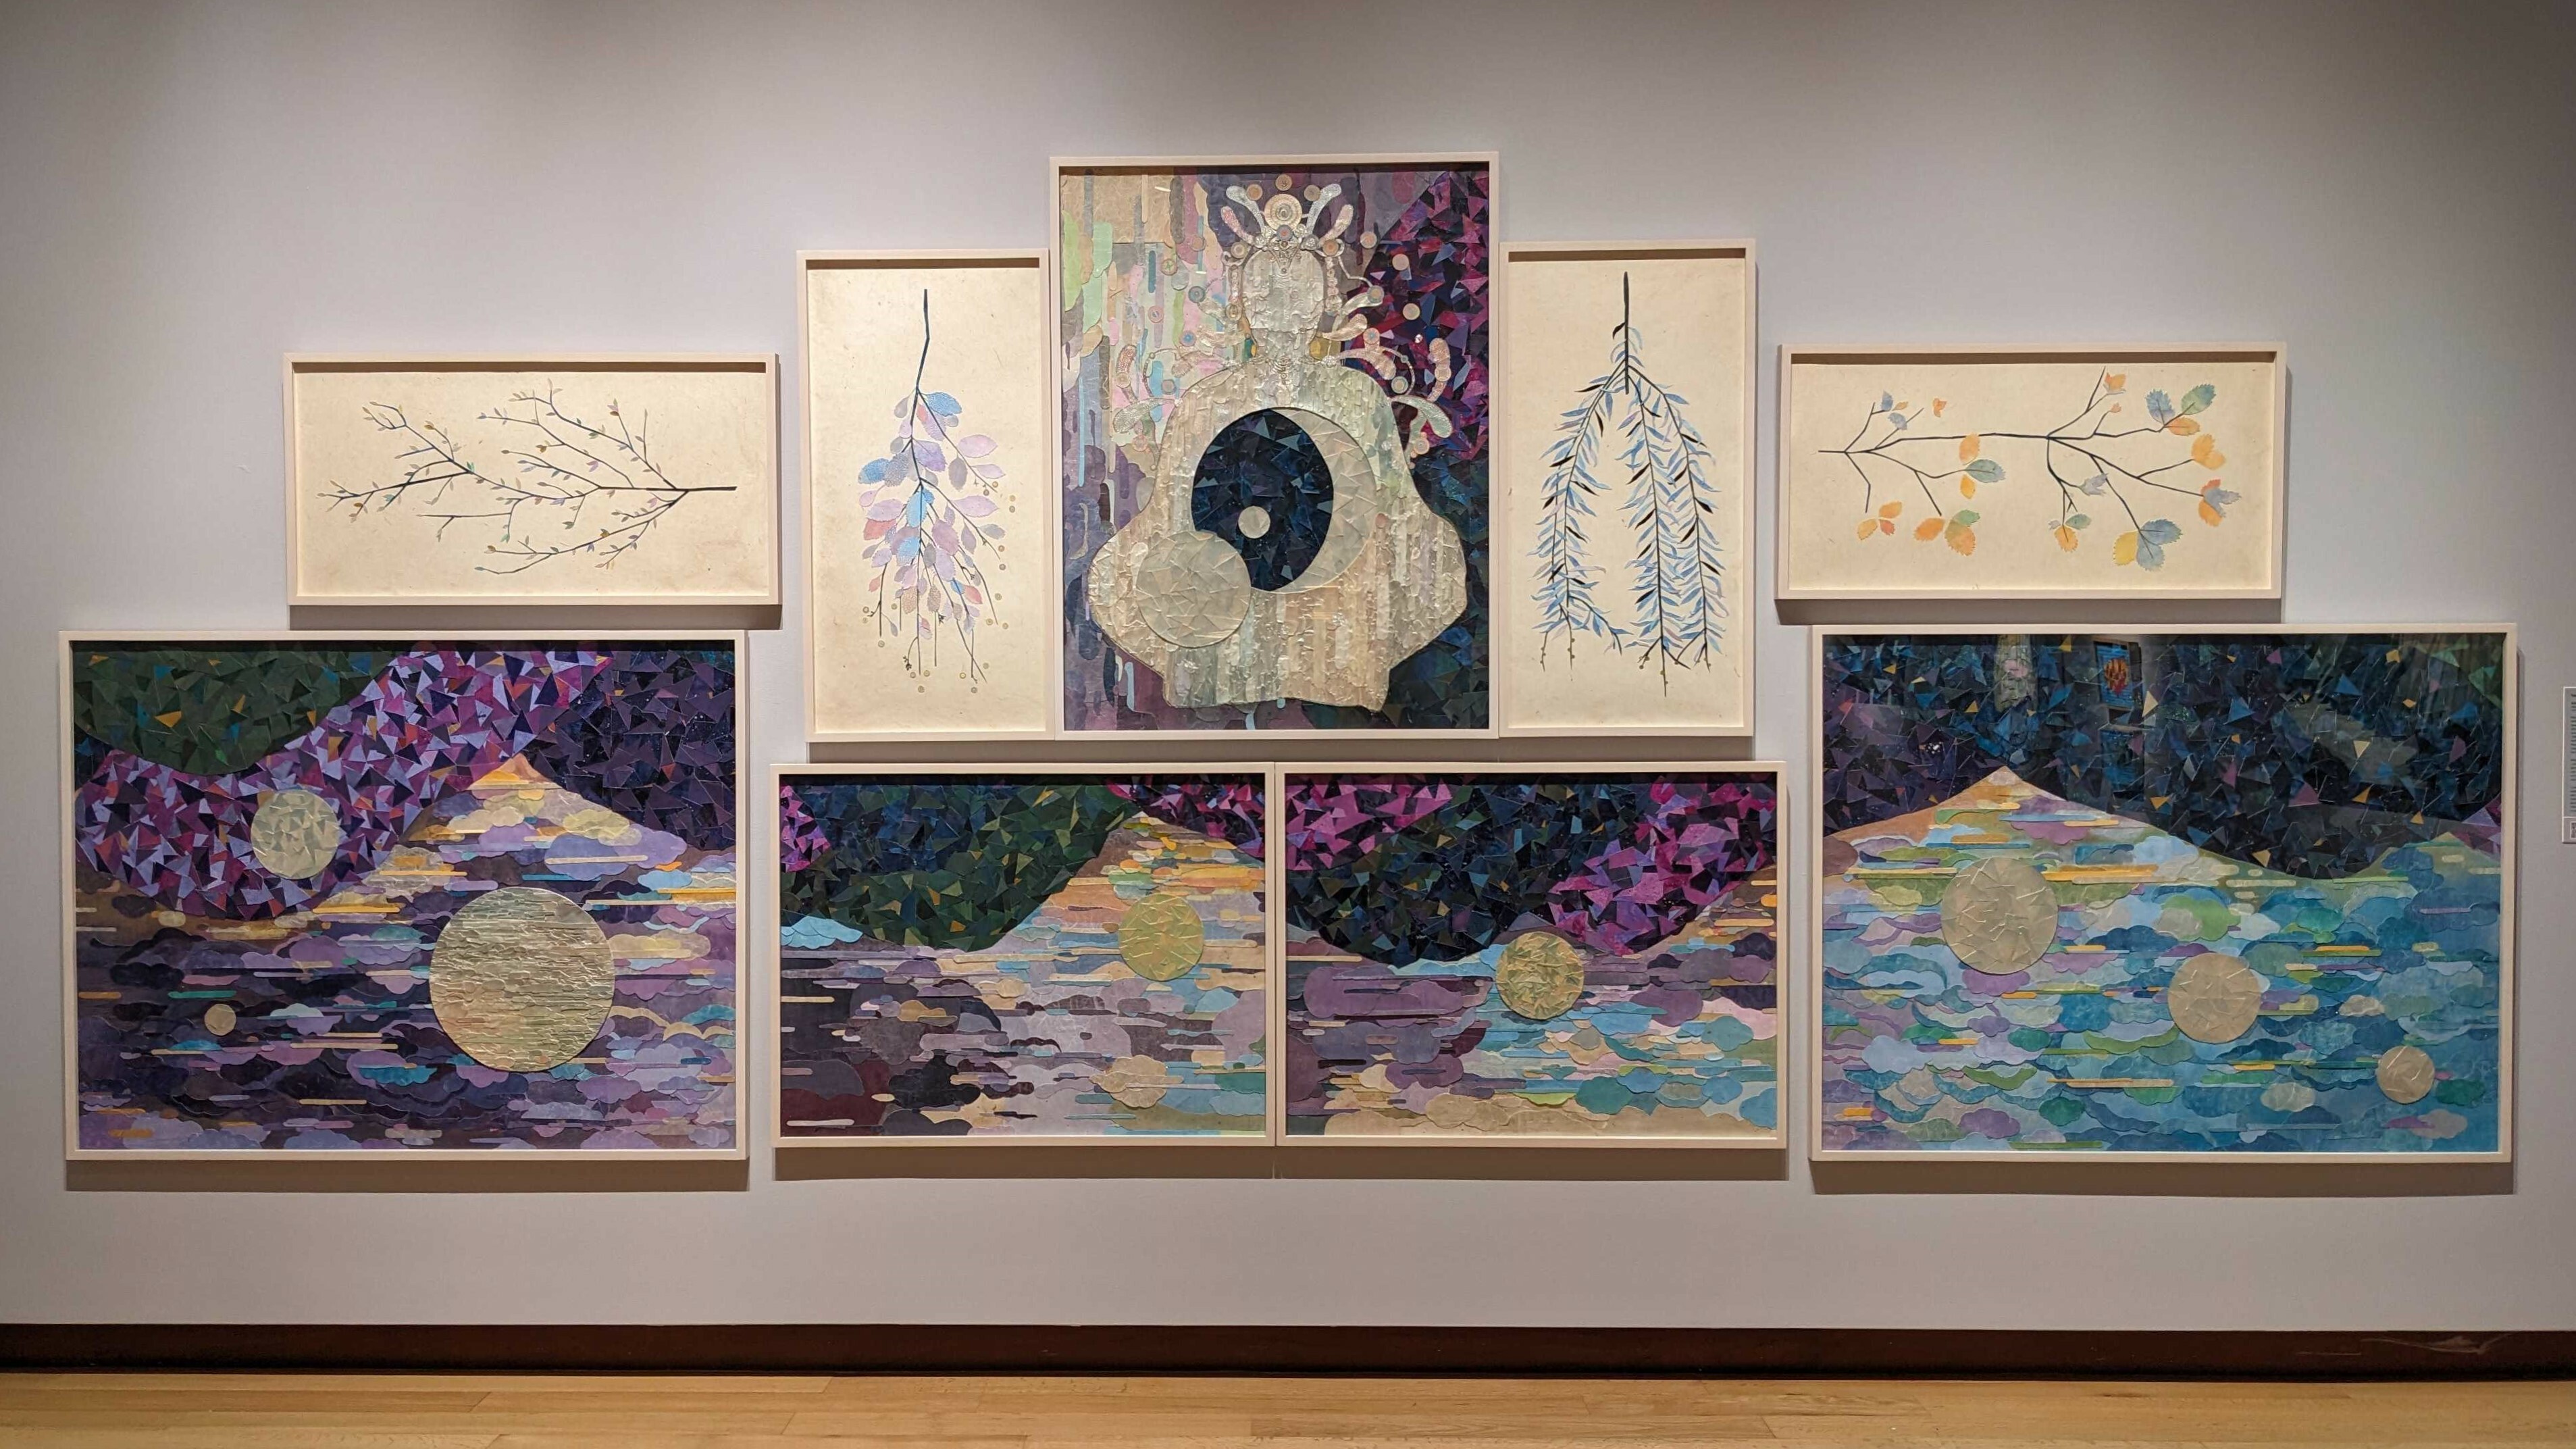 Saya Woolfalk "Birthing a New Sky (Inverted Variation)," 2021-2023, Mixed media collages on paper, vinyl, and wood, 120 × 218 3/4 × 2 3/4 in. (304.8 × 555.6 × 7 cm), Courtesy of the artist and Leslie Tonkonow Artworks + Projects, New York, NY